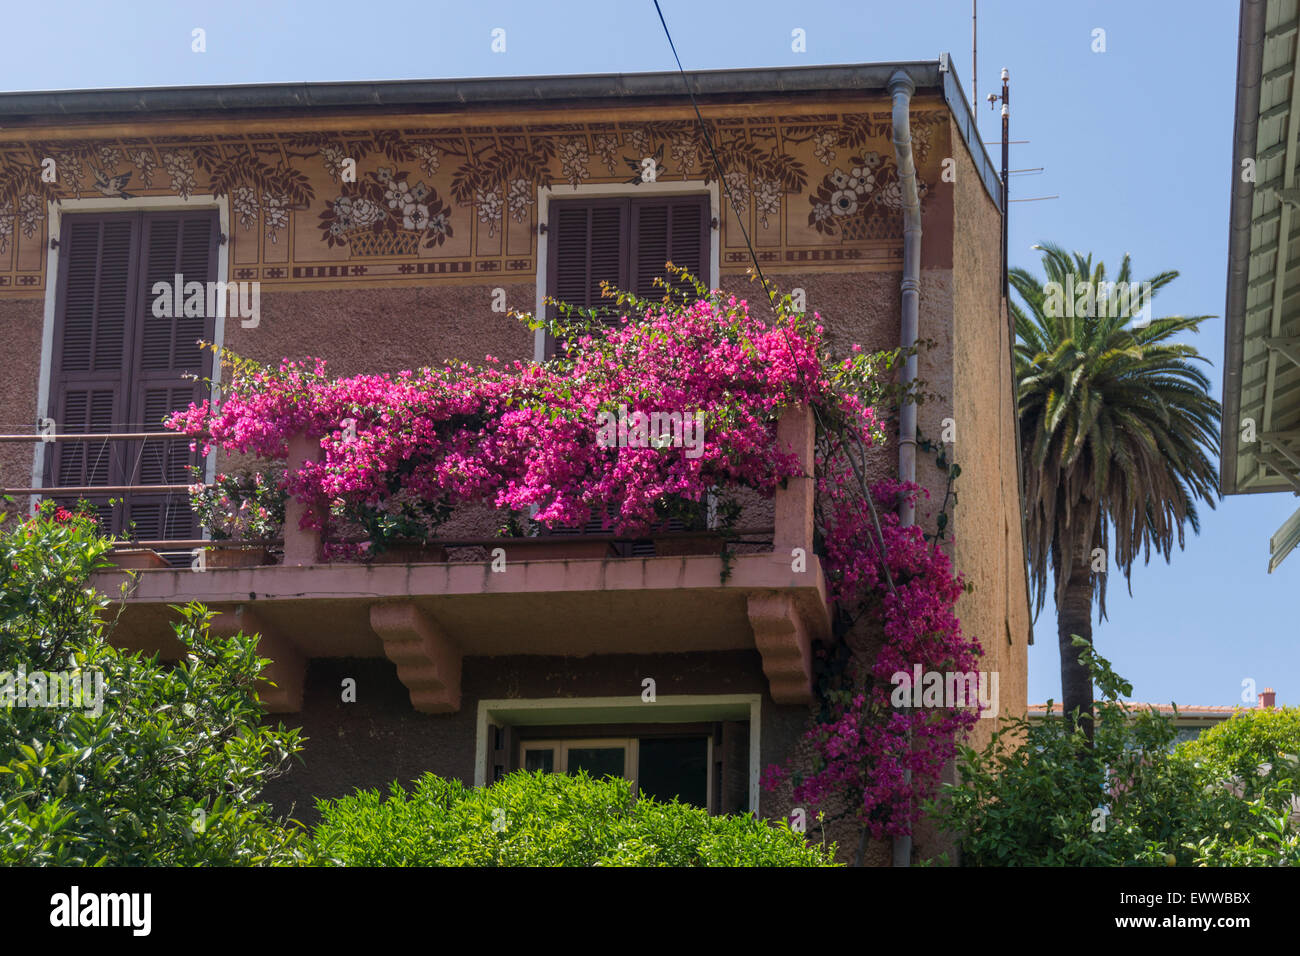 Balcony with flowers in Villefranche, Cote d Azur, France Stock Photo